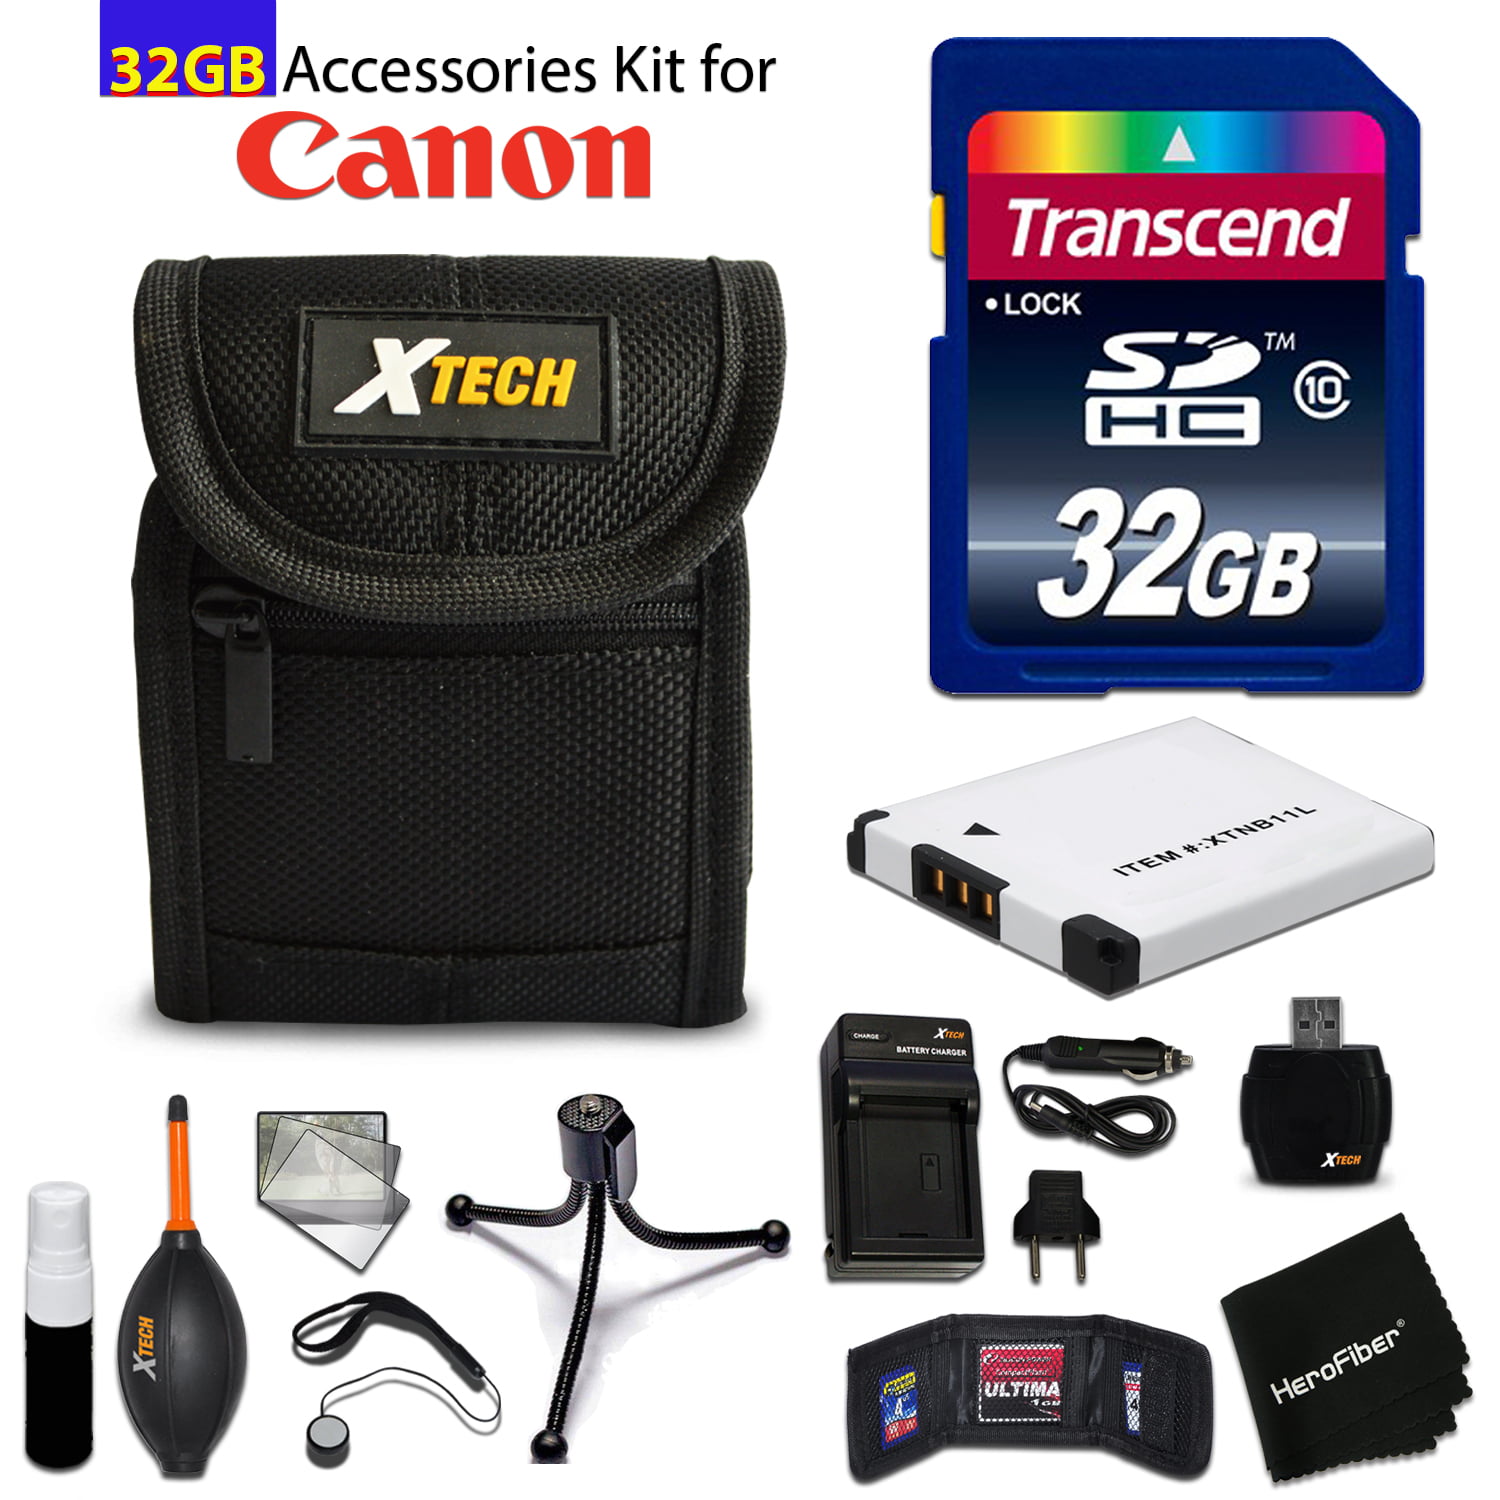 ELPH 180 IS 32GB Accessory Kit for Canon PowerShot ELPH 360 HS Kit AC/DC Charger ELPH 350 HS NB-11L Battery ELPH 170 ELPH 160 includes 32GB High-Speed Memory Card Elph 190 IS Fitted Case